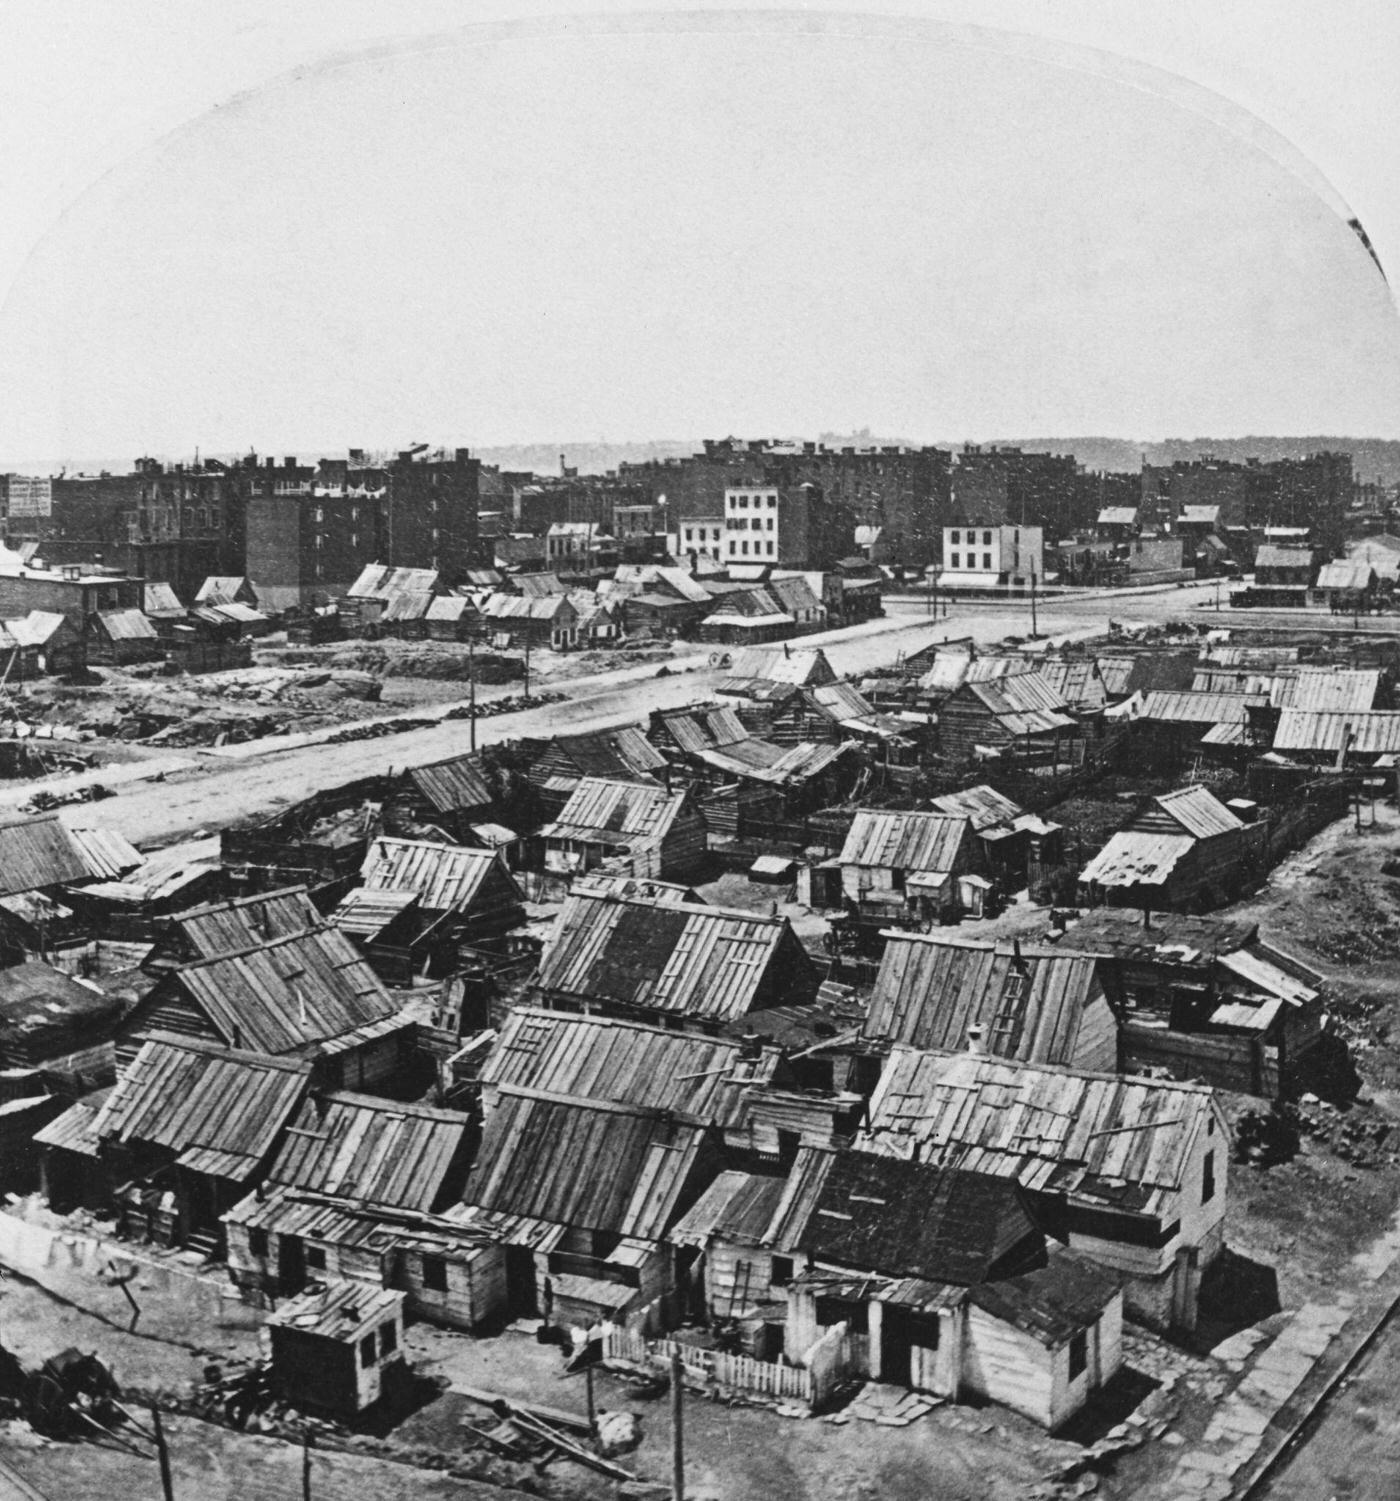 High Angle View Of Slum Dwellings On Eighth Avenue, West Side Of Manhattan, New York City, 1885